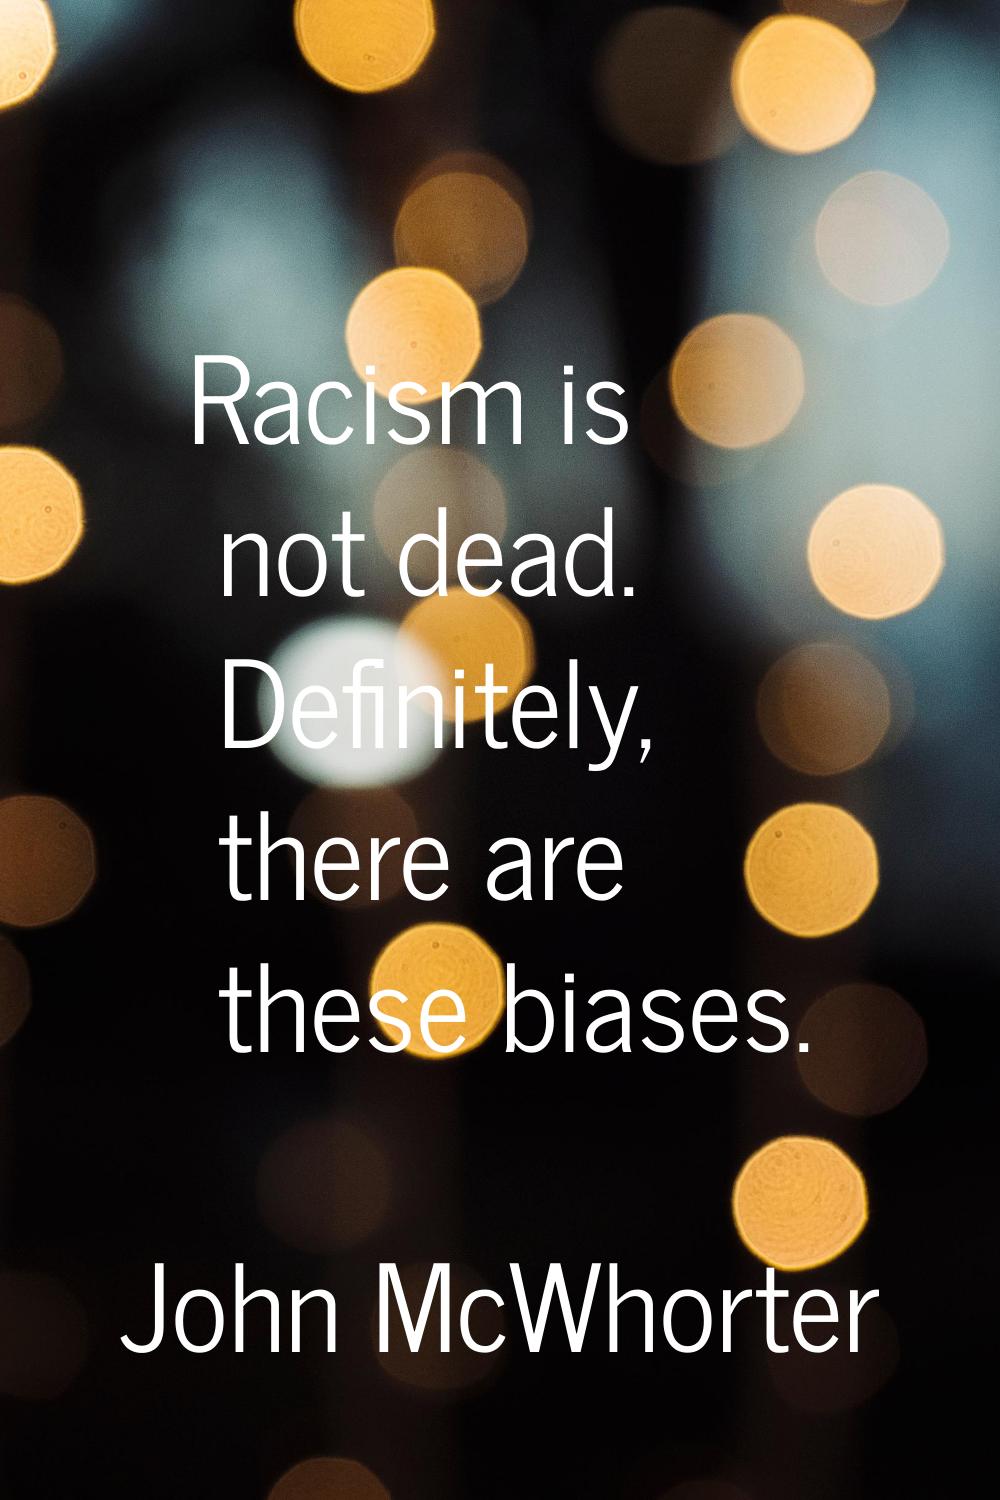 Racism is not dead. Definitely, there are these biases.